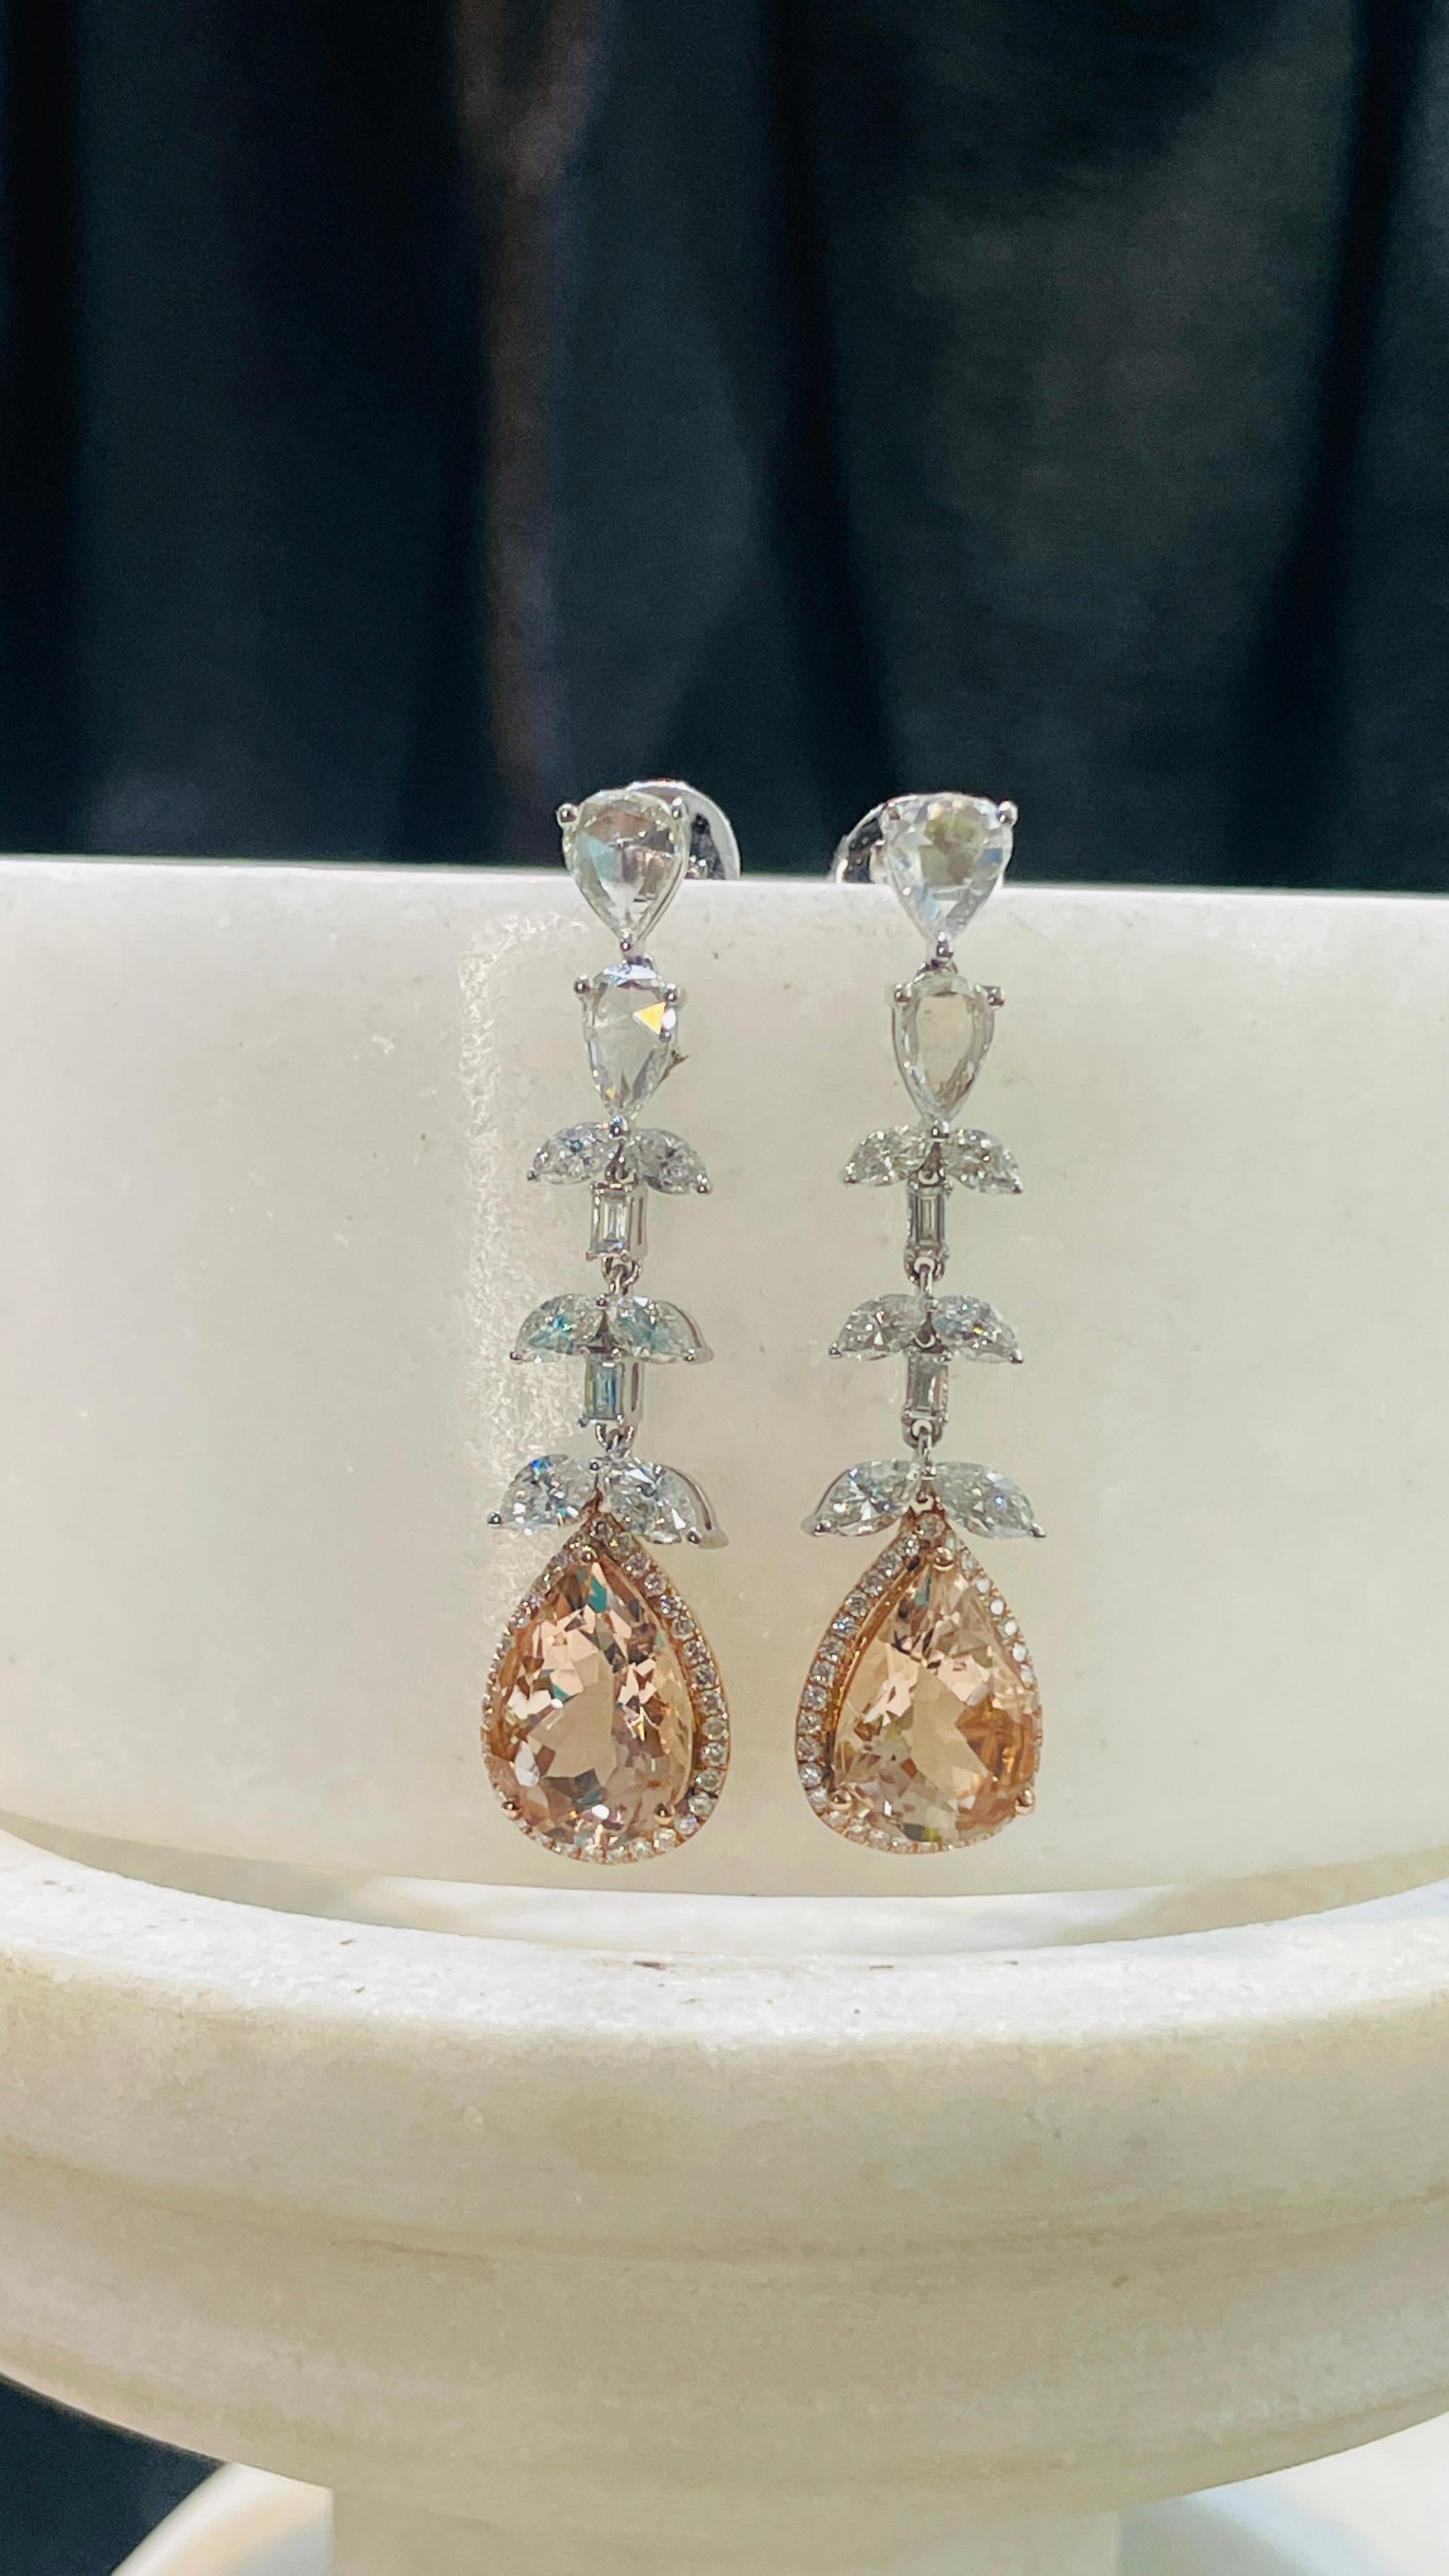 Semi Gemstone Dangle earrings to make a statement with your look. These earrings create a sparkling, luxurious look featuring pear cut gemstone.
If you love to gravitate towards unique styles, this piece of jewelry is perfect for you.

PRODUCT